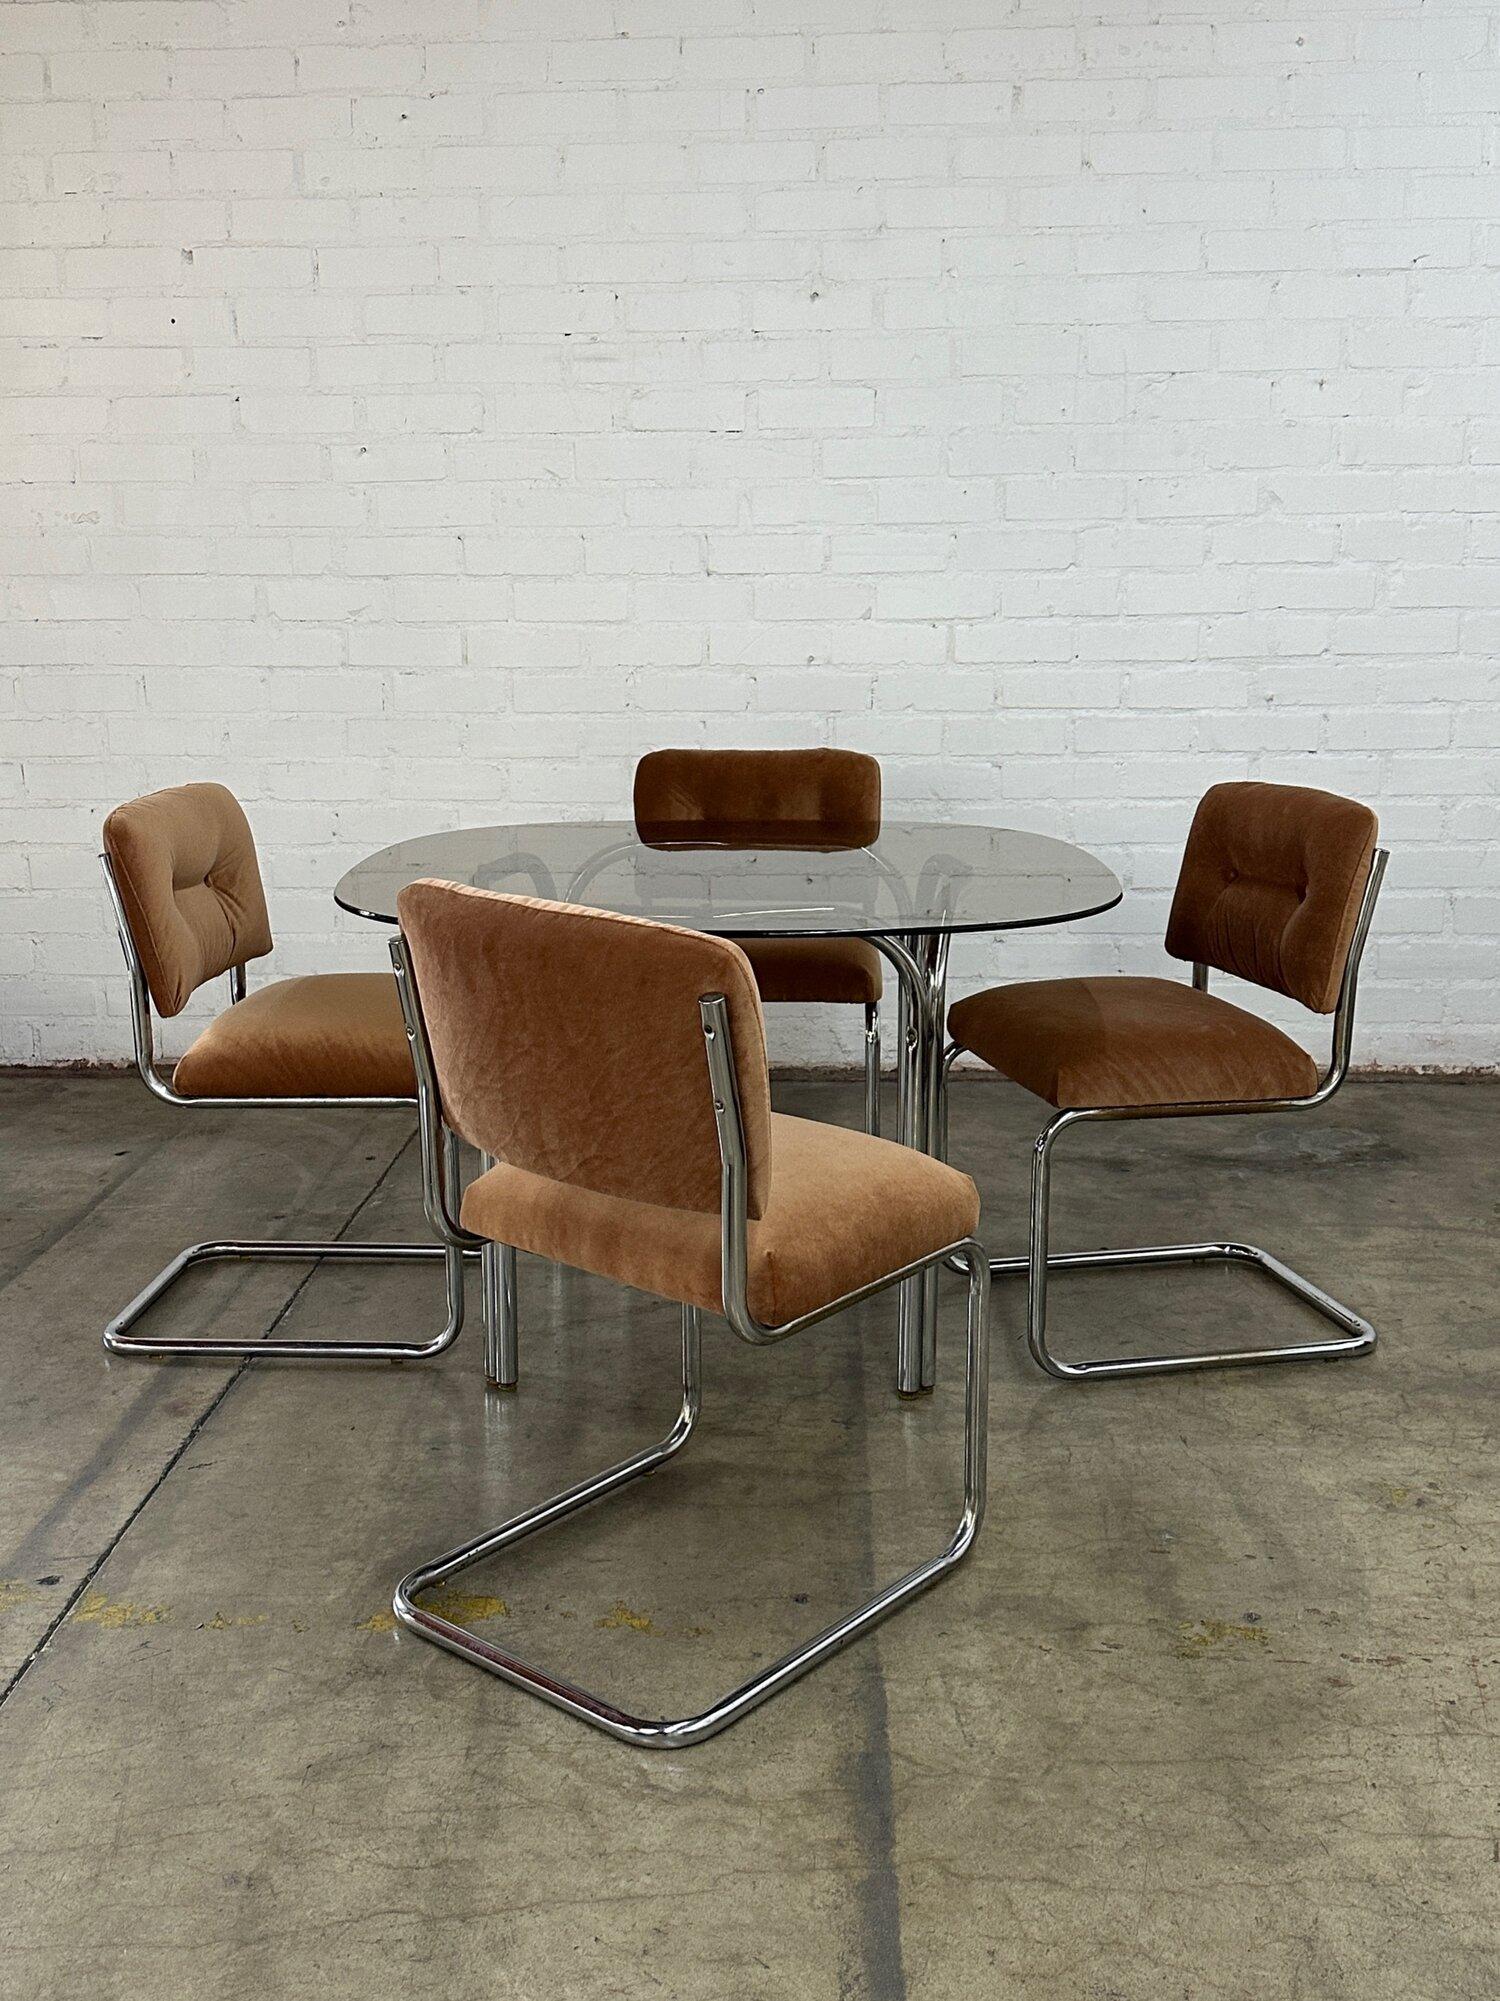 Late 20th Century Cantilevered dining chairs - set of four